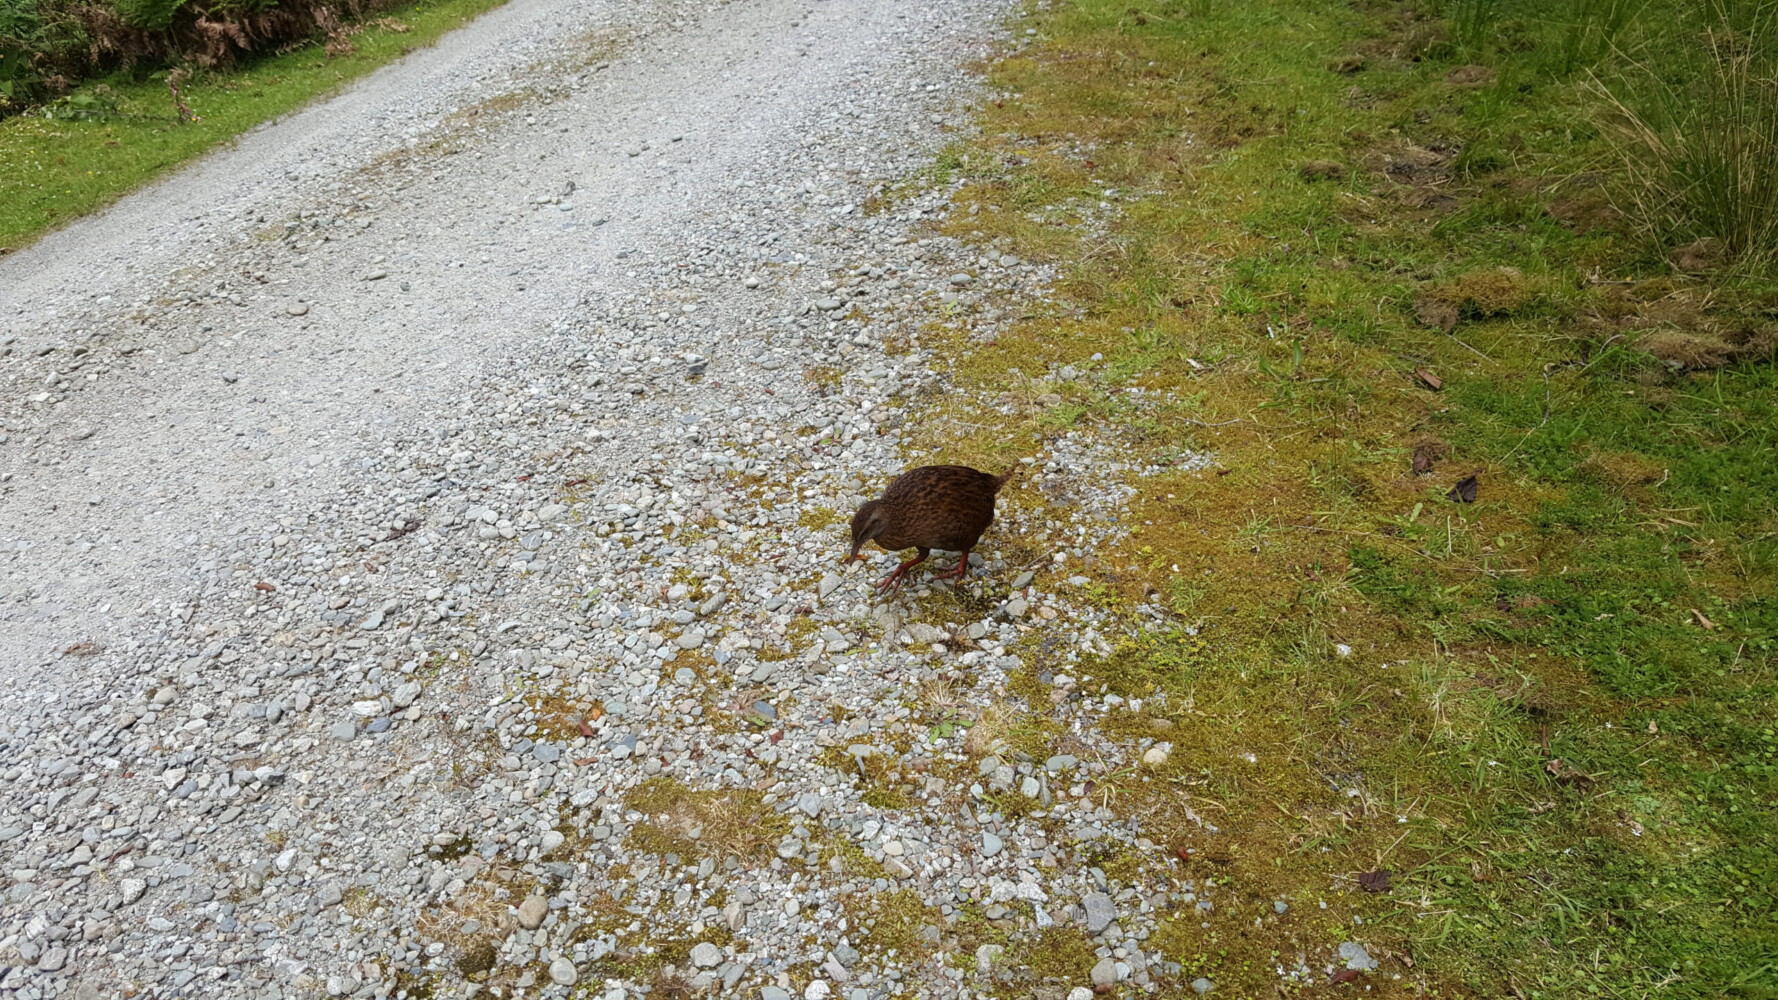 Weka inspecting the road